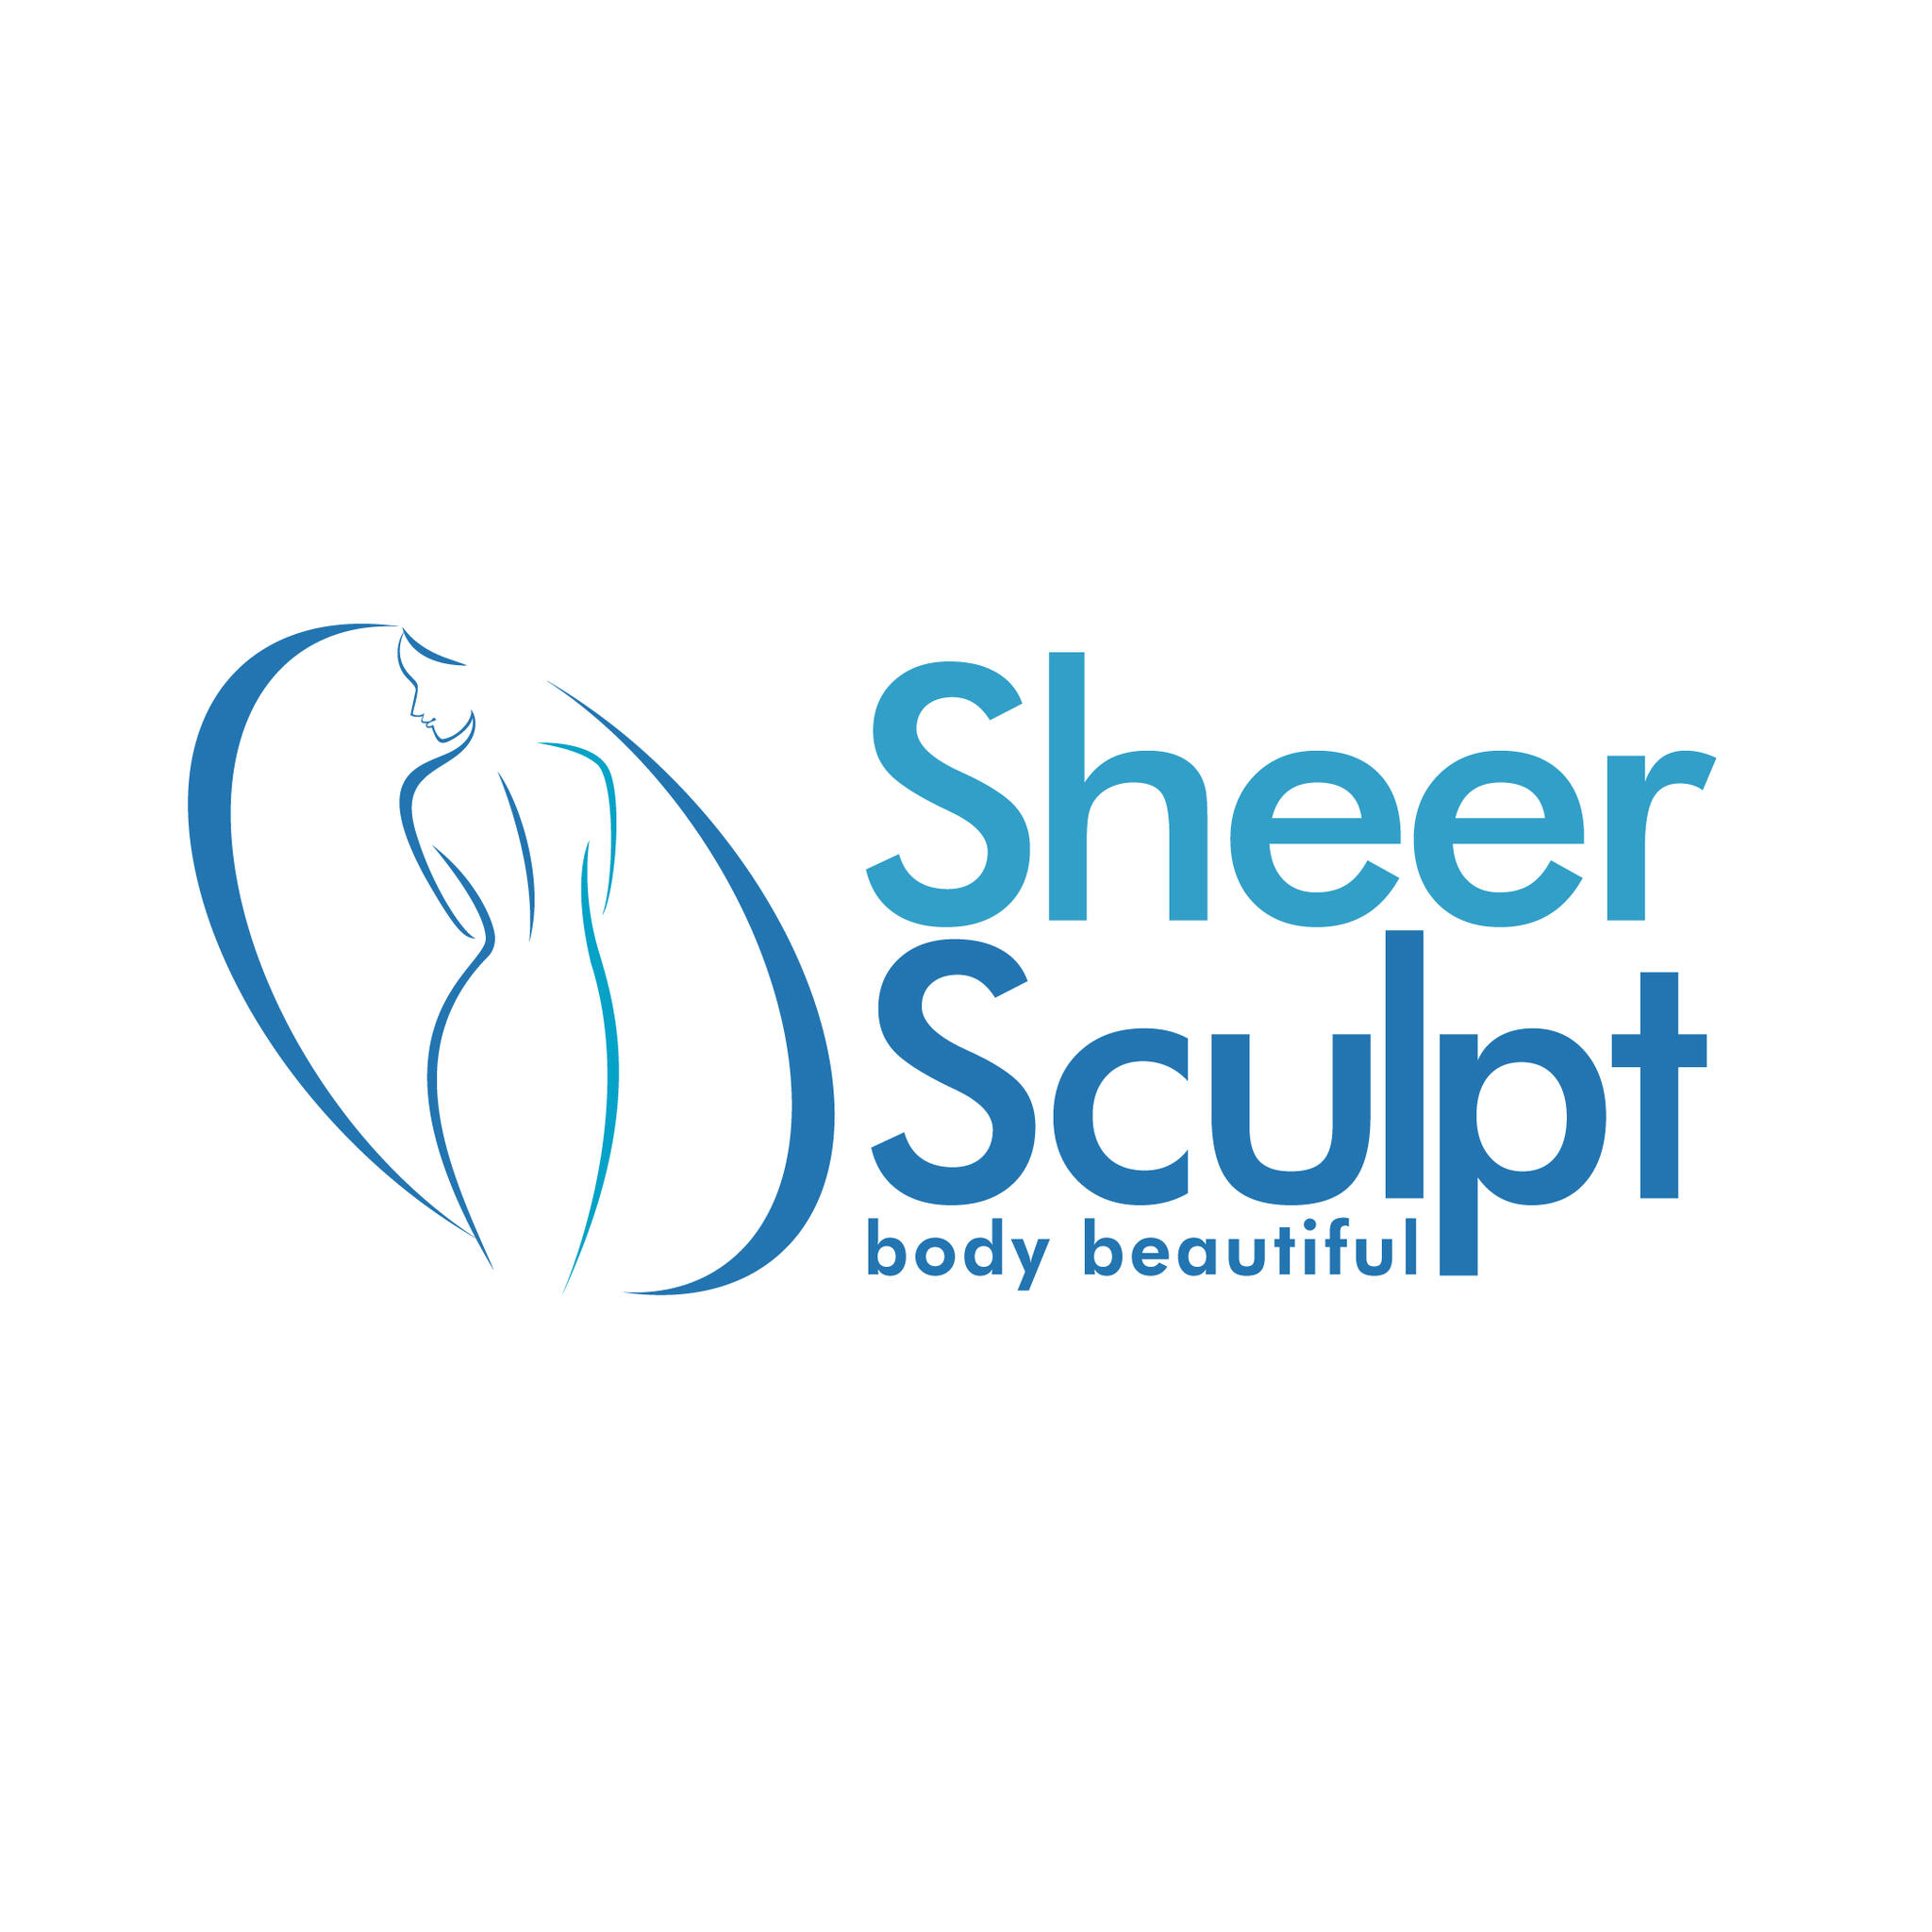 Sheer Sculpt CoolSculpting - Medical Spa in Chadds Ford